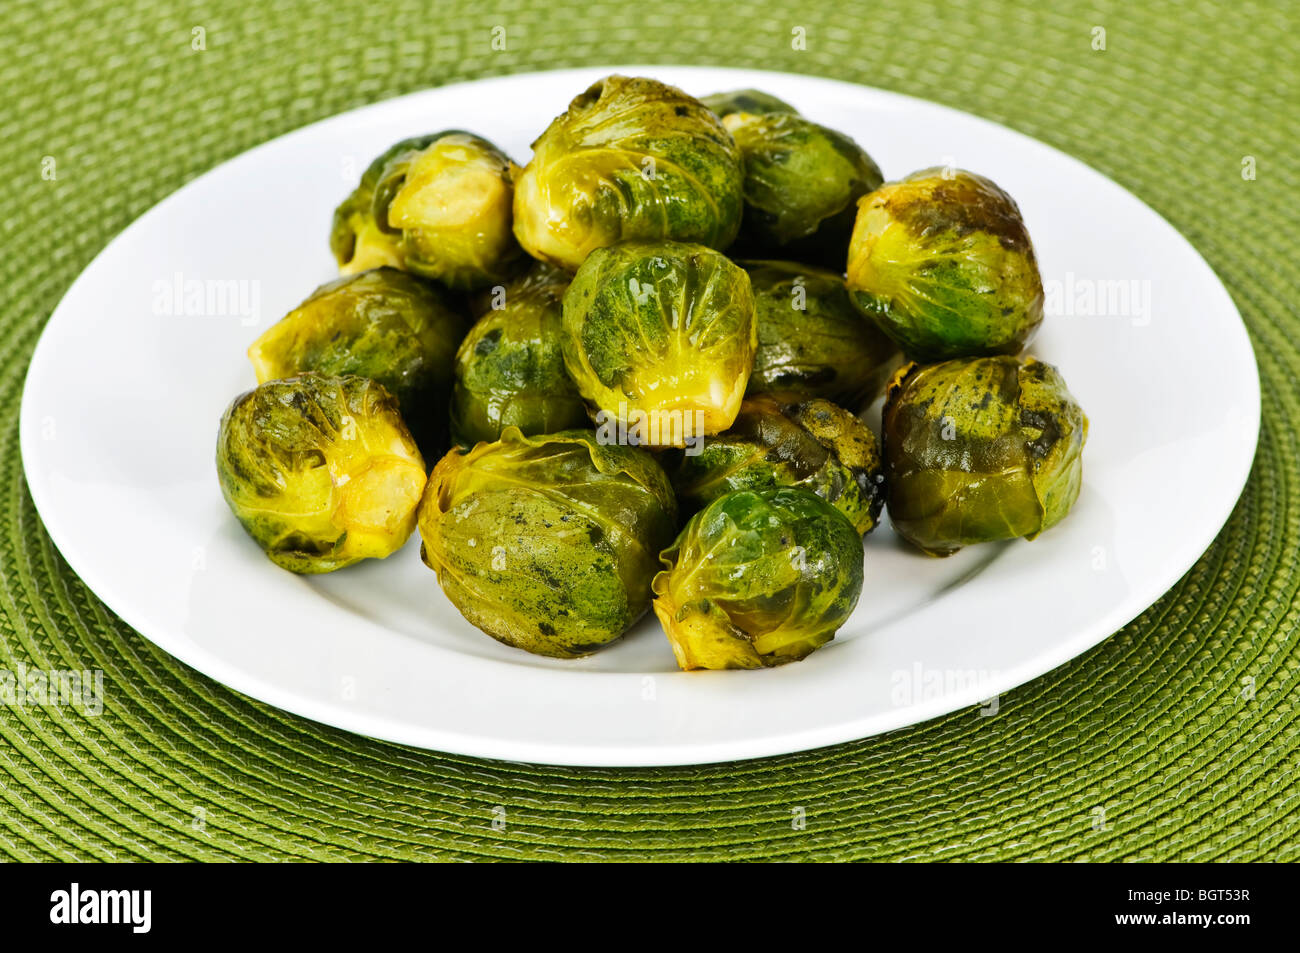 Plate of roasted green brussels sprouts on placemat Stock Photo